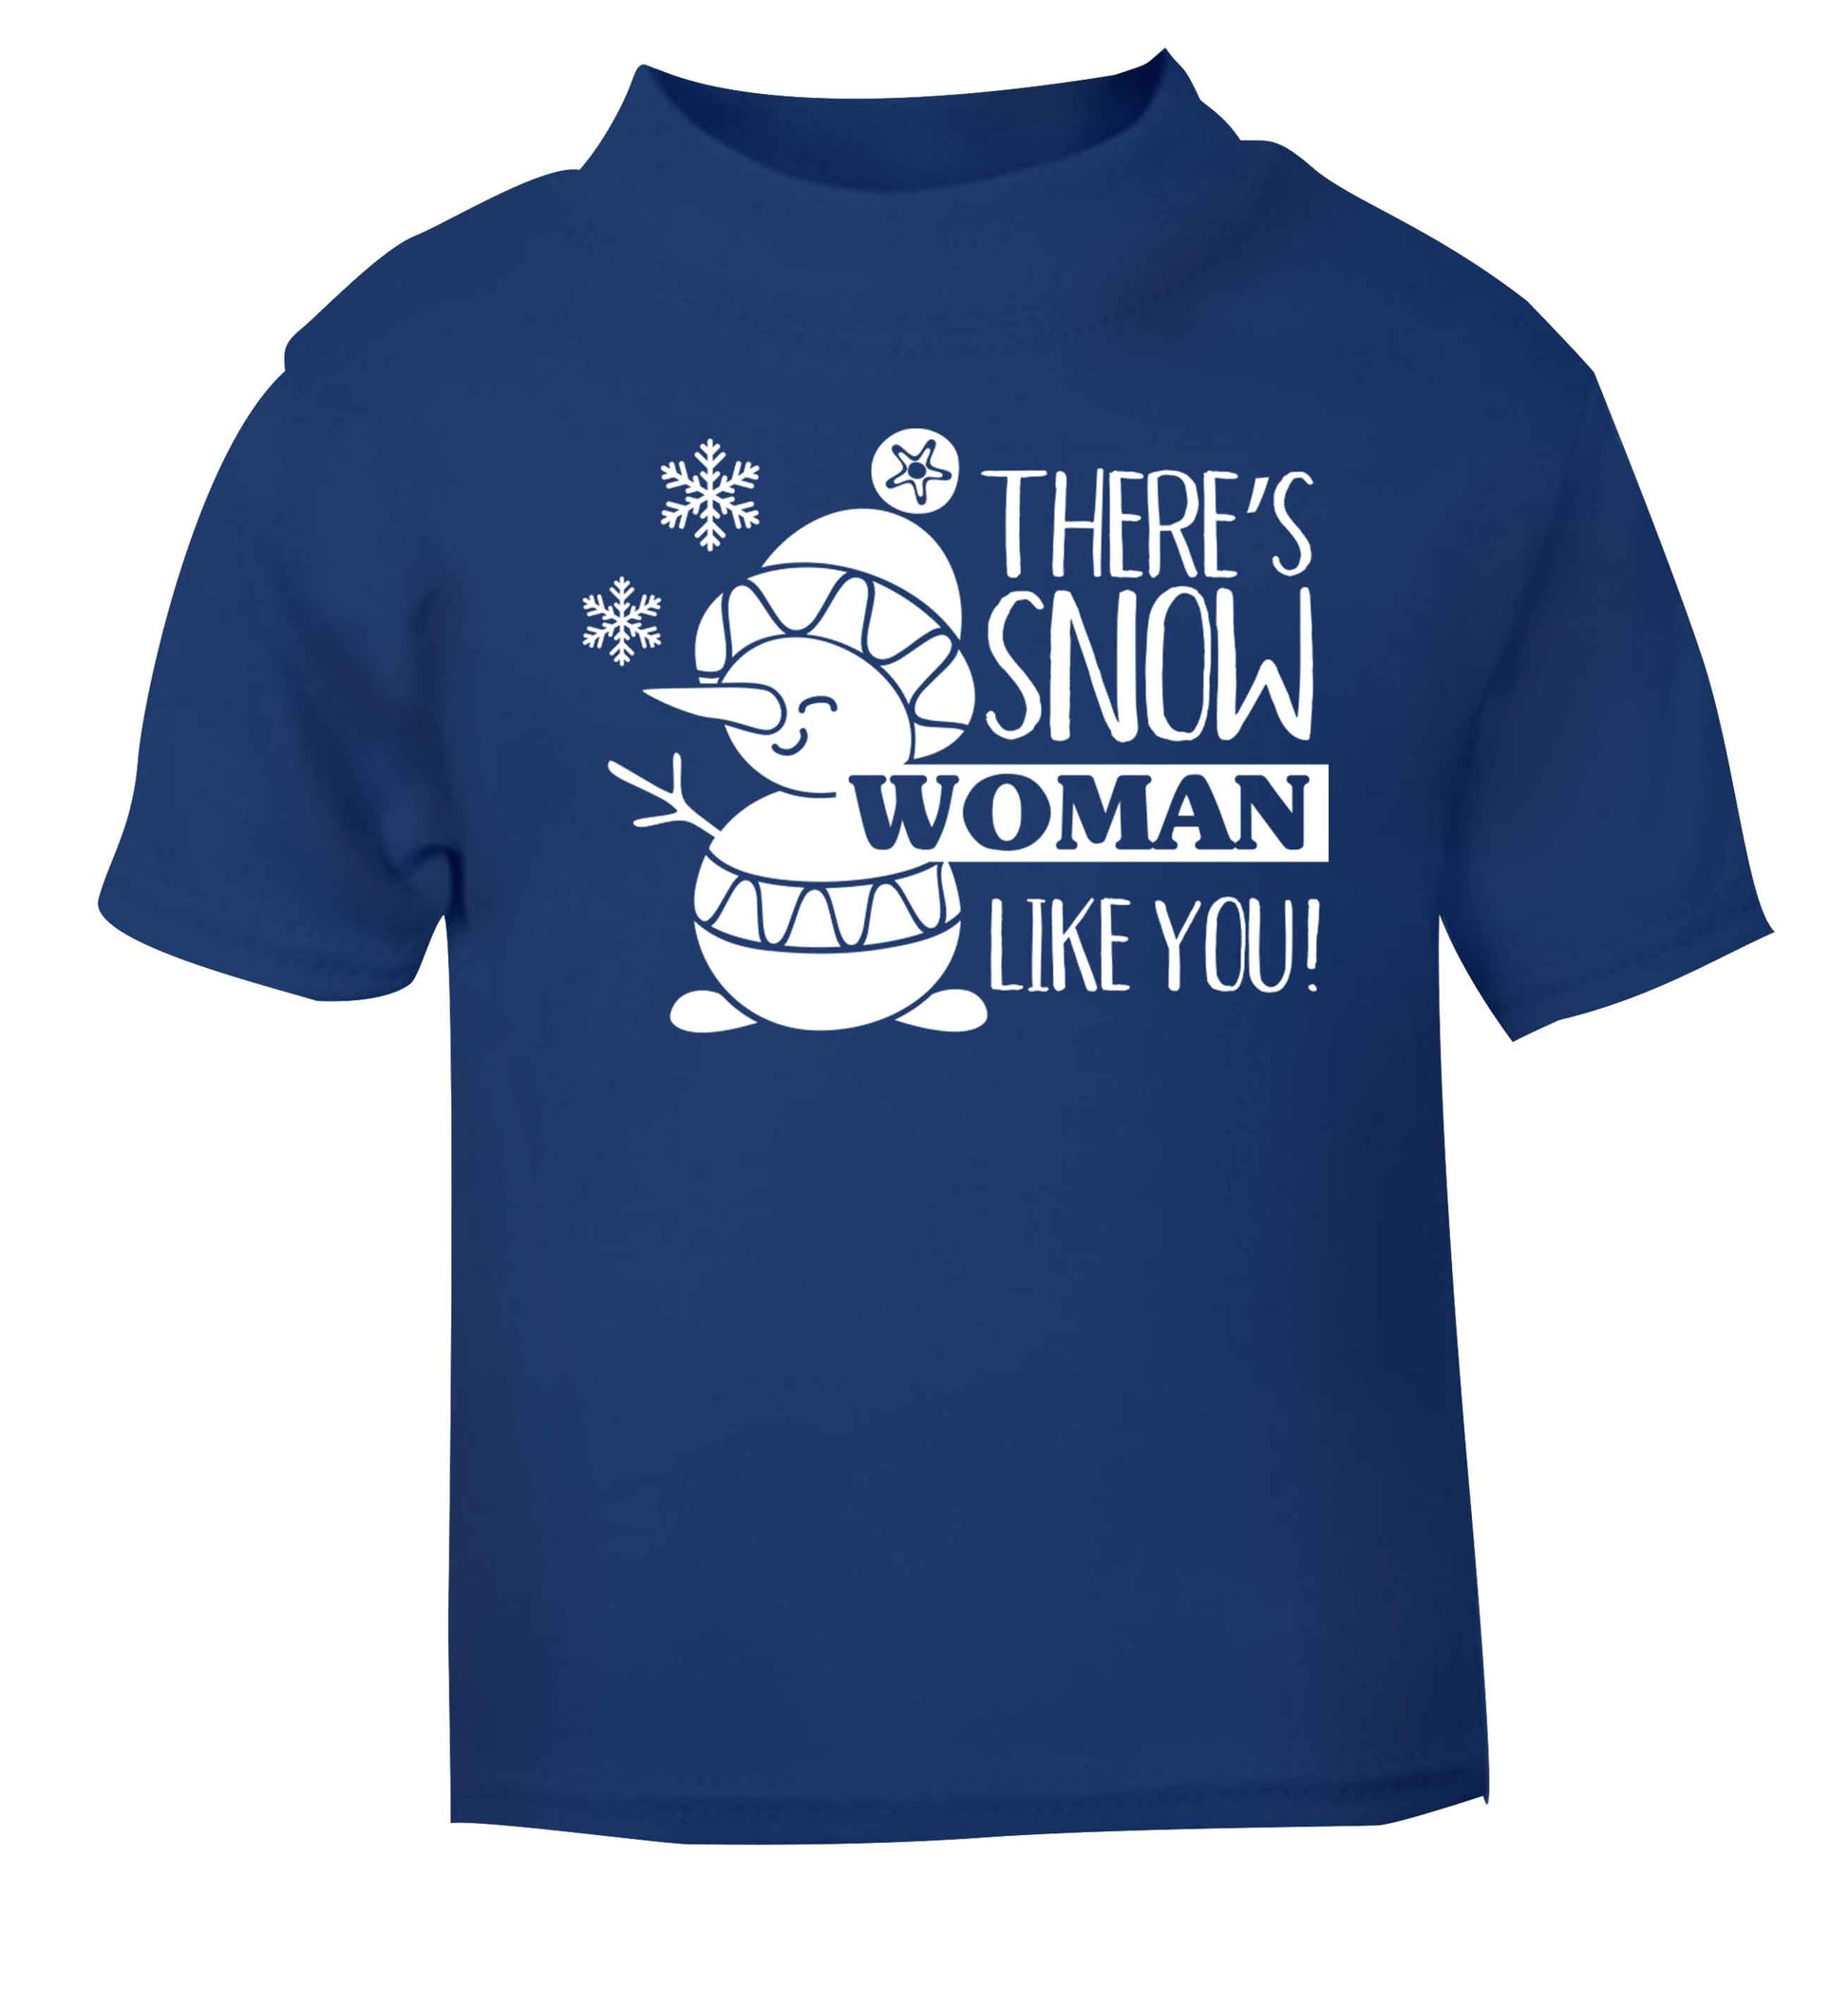 There's snow woman like you blue baby toddler Tshirt 2 Years